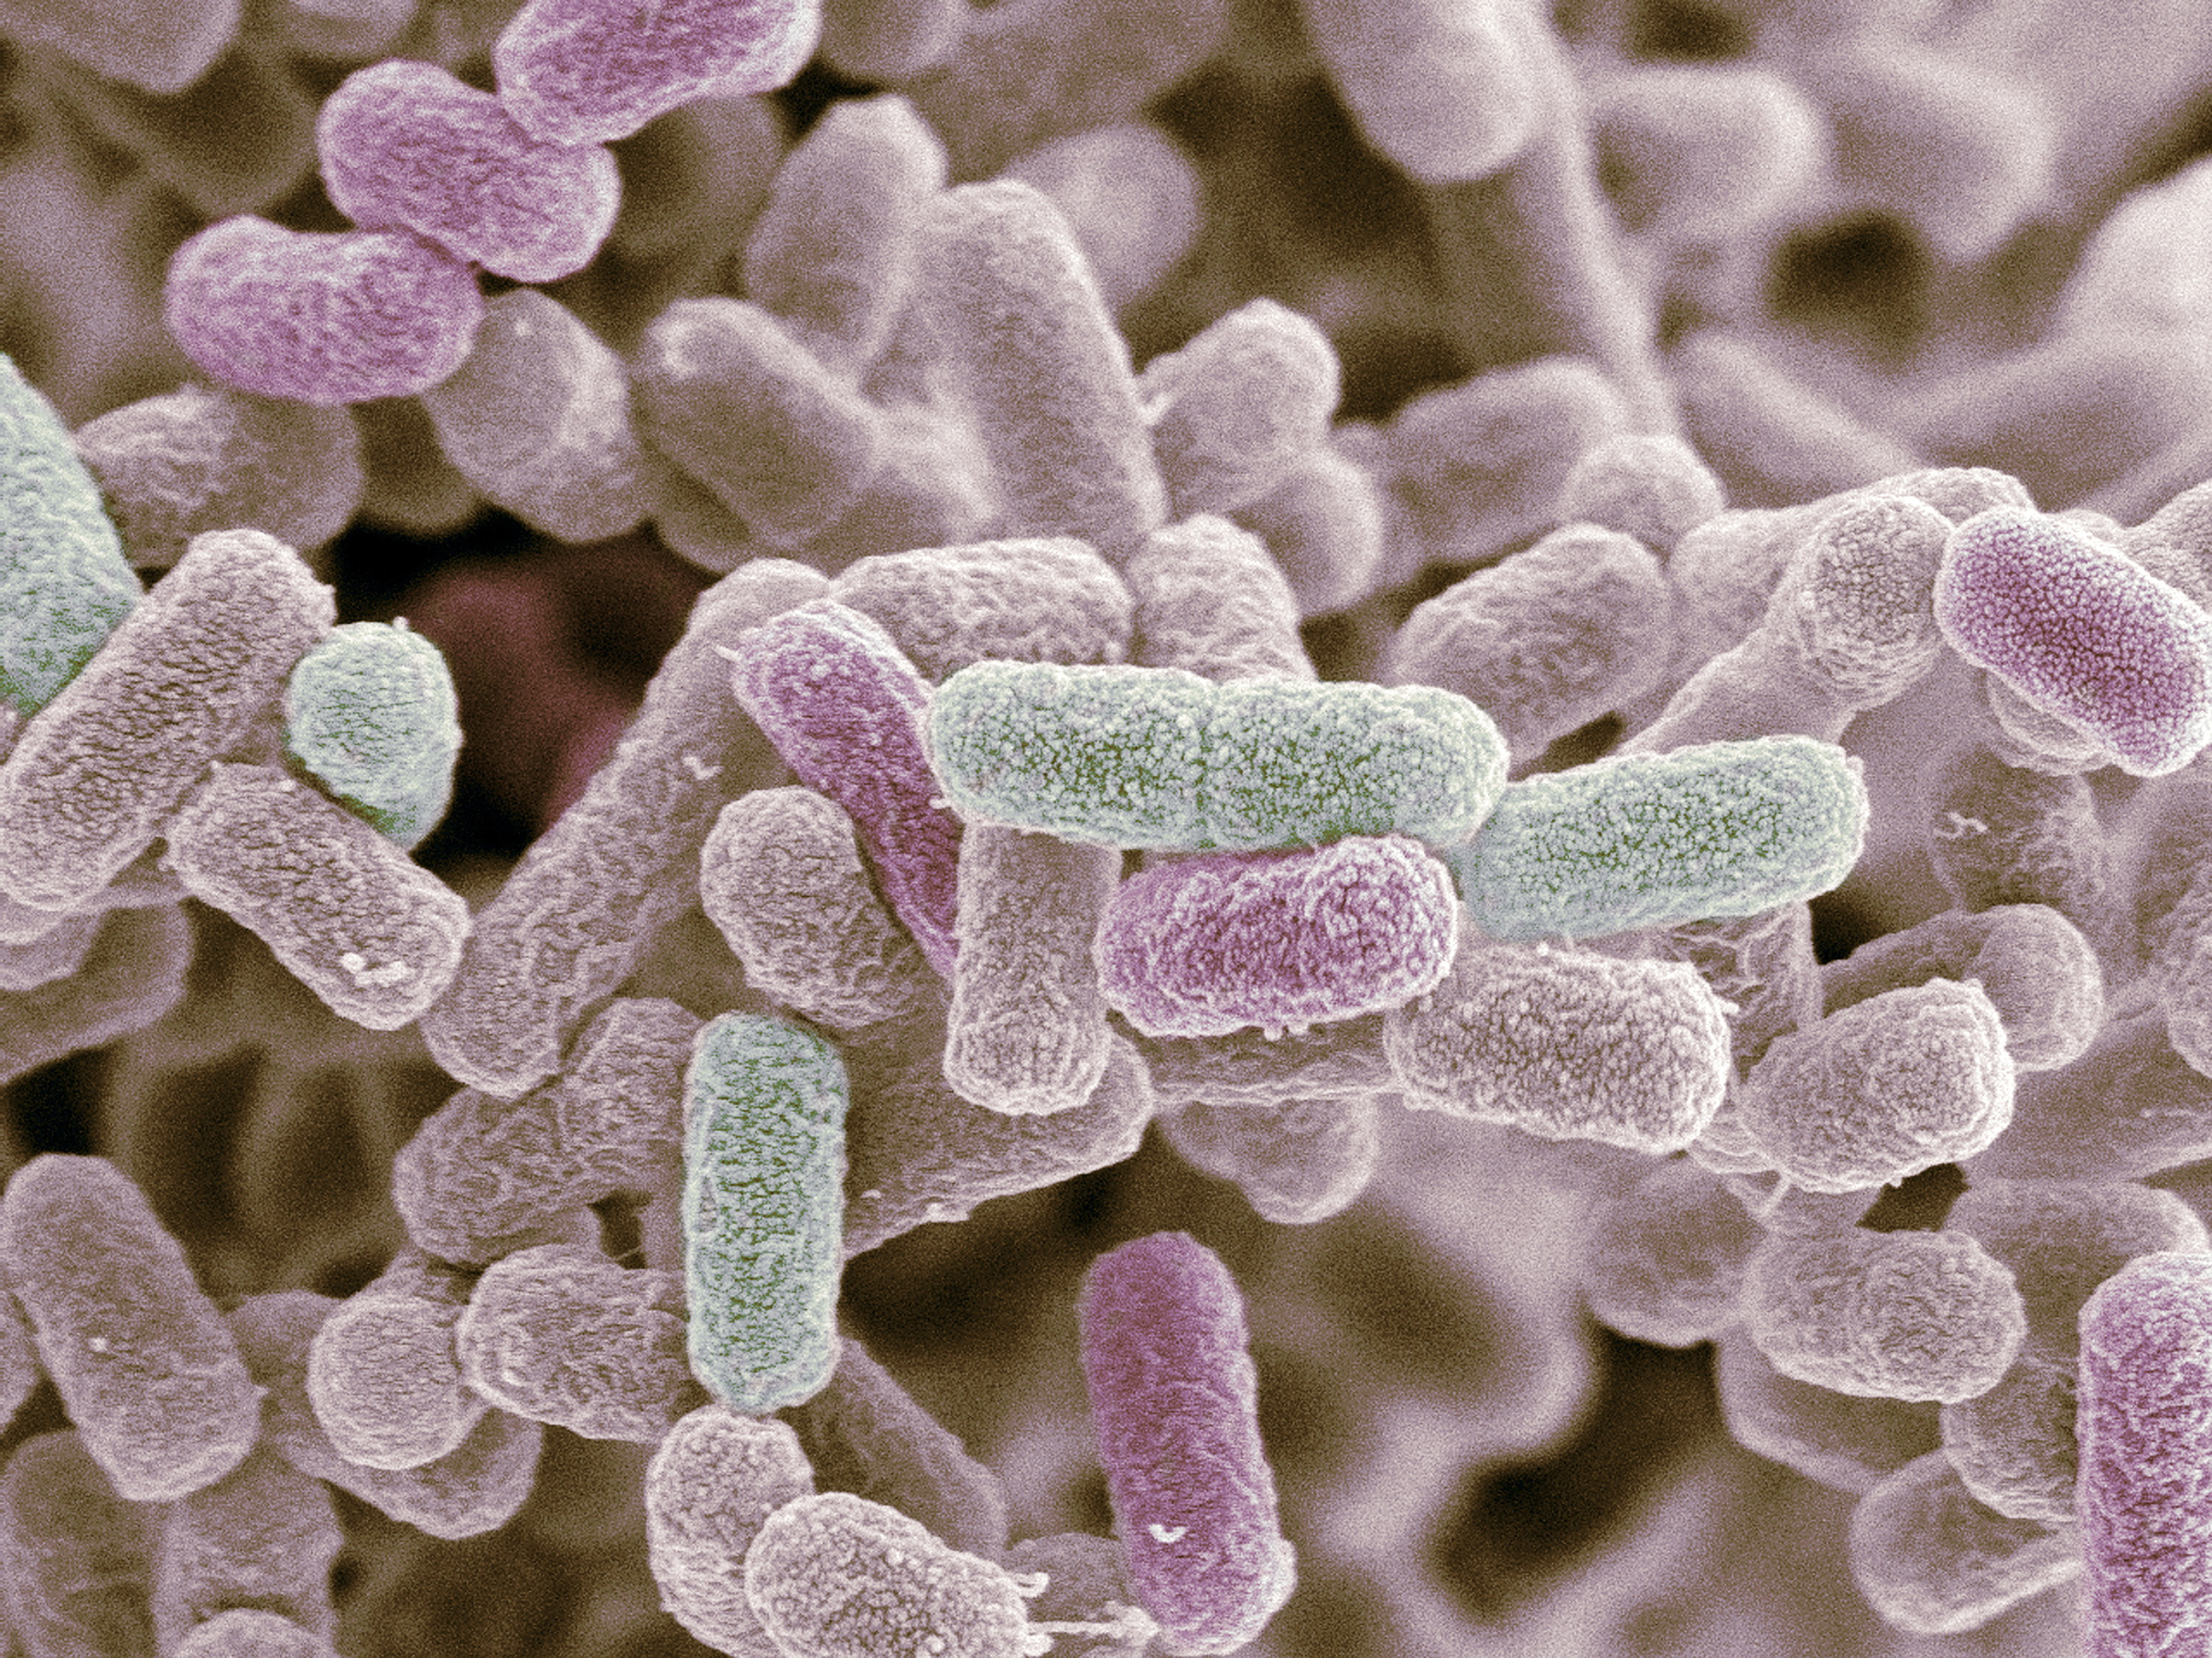 E. coli bacteria. Coloured scanning electron micrograph (SEM) of Escherichia coli bacteria. (STEVE GSCHMEISSNER—Getty Images/Science Photo Library RM)